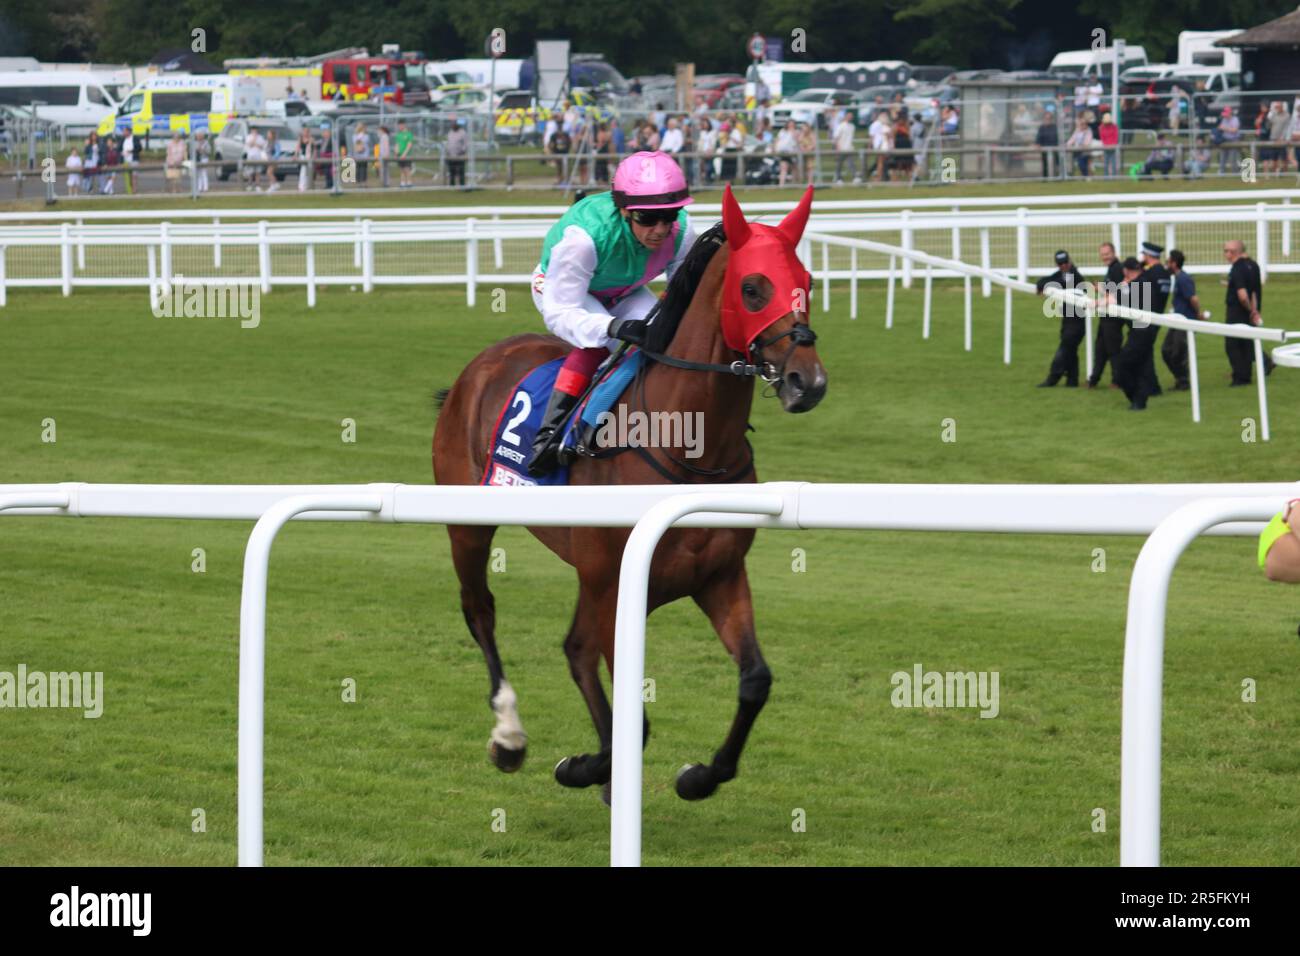 Epsom Downs Surrey, UK. 3rd June, 2023. Frankie Dettori riding number 2 Arrest on his way to the start at Tattenham Corner, Epsom. The pre race favourite only came 11th at the world famous Epsom Derby in Frankie's last appearance as a jockey at Epsom. Credit: Julia Gavin/Alamy Live News Stock Photo